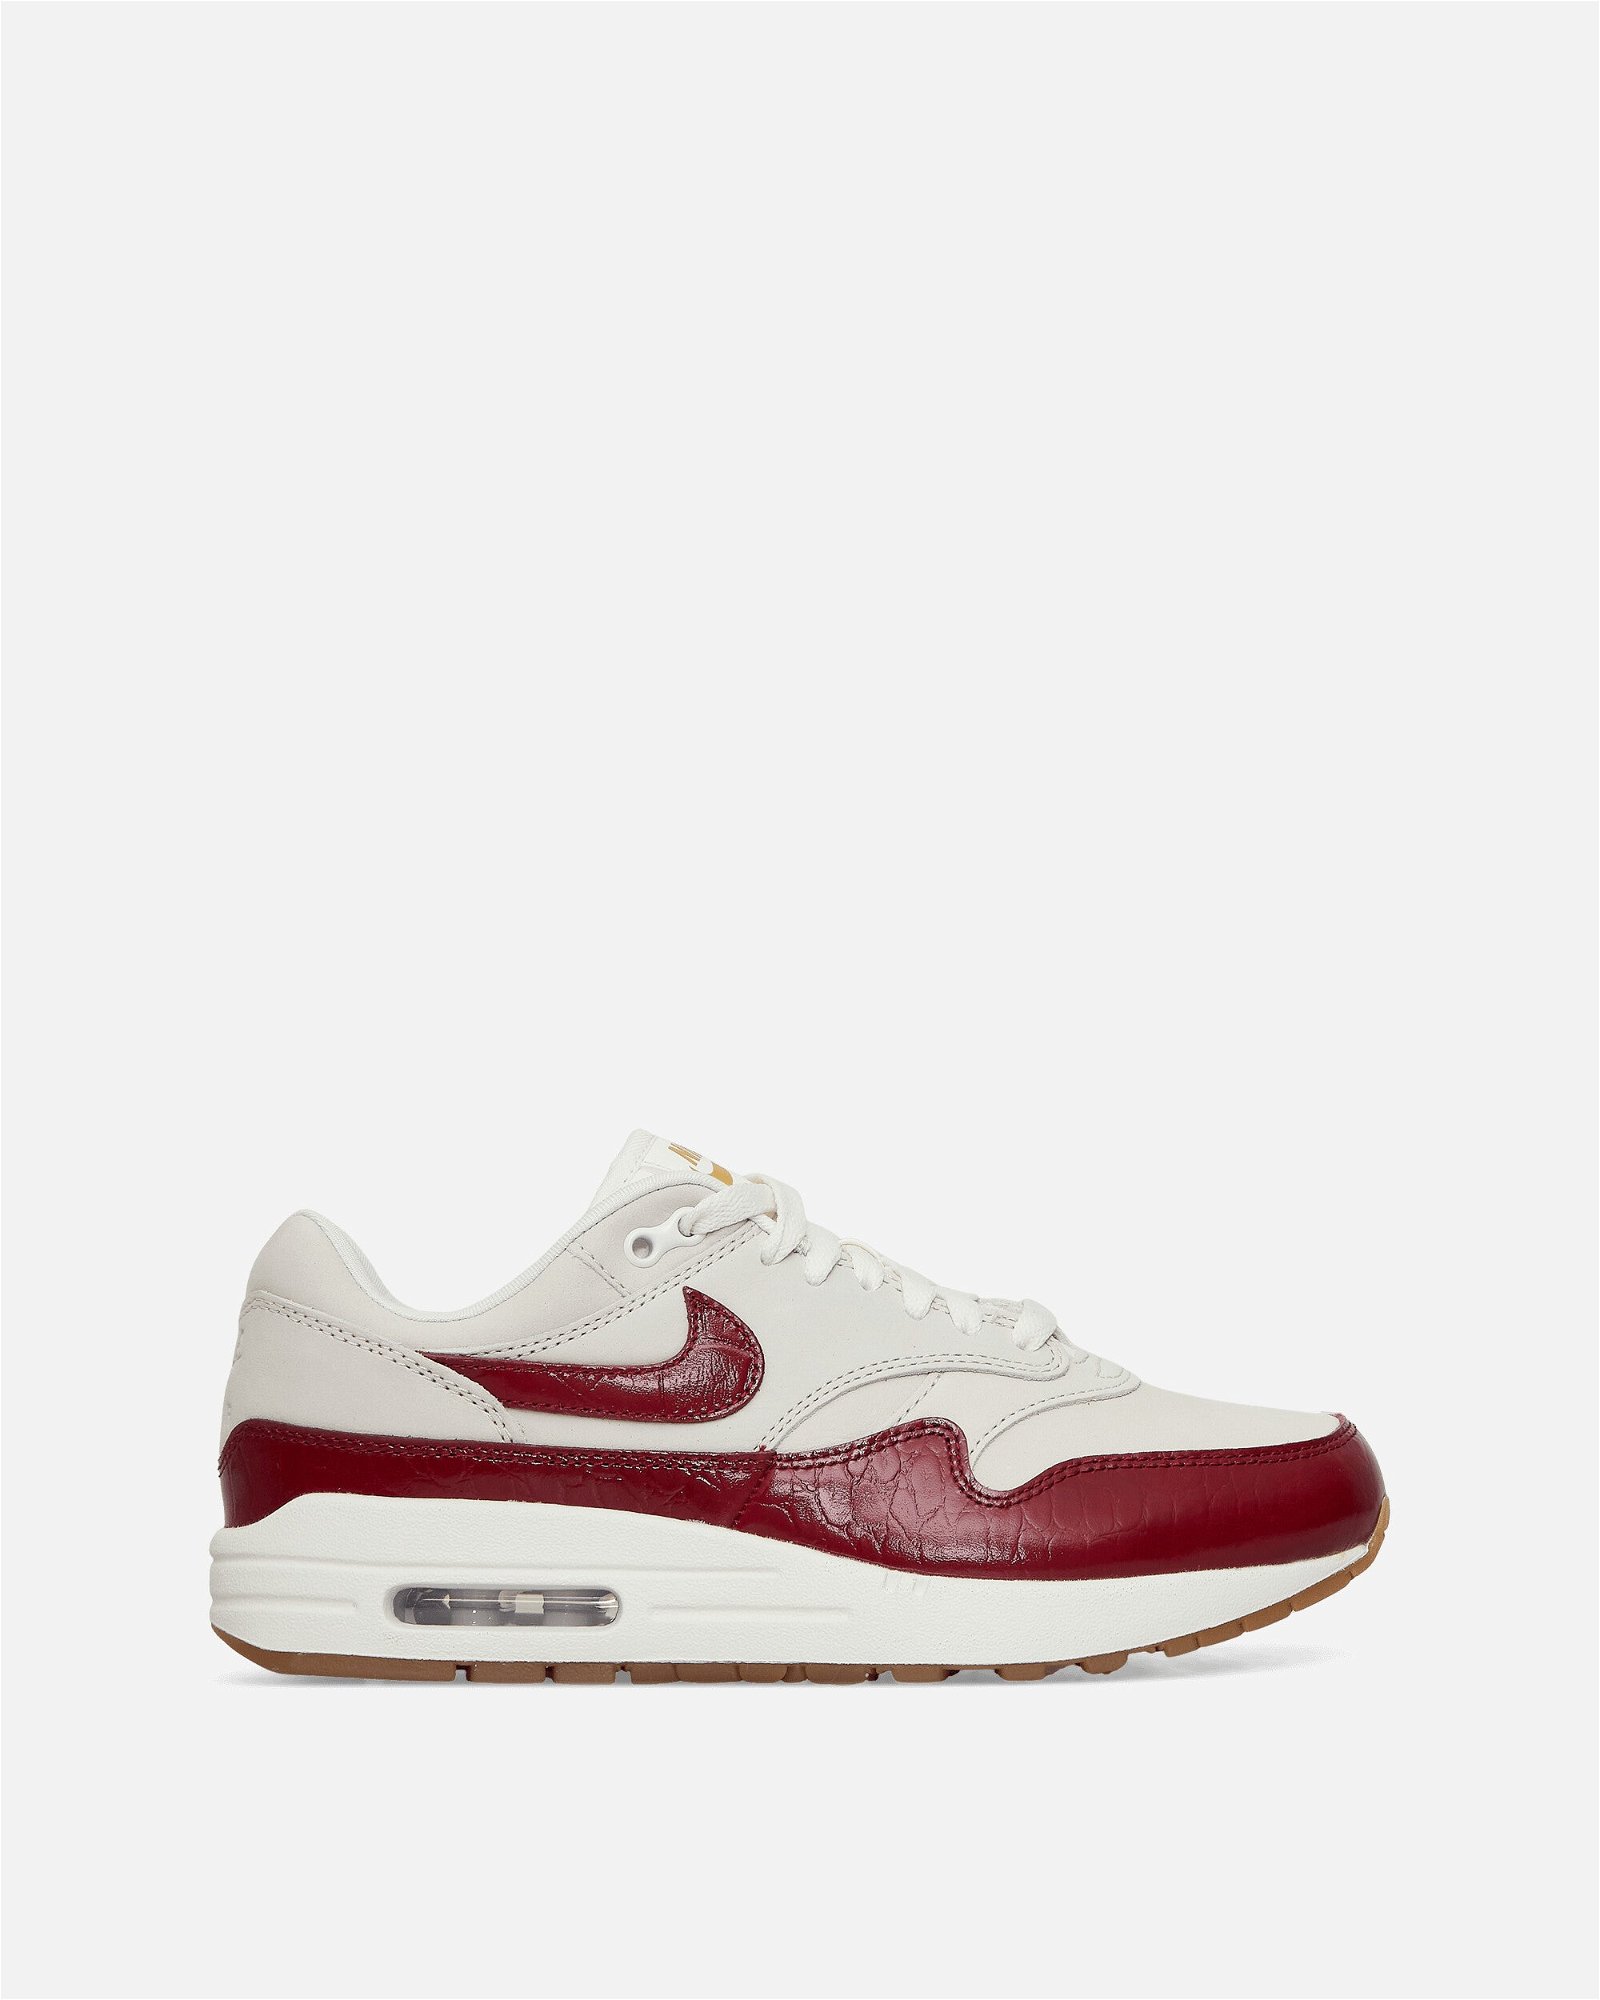 Air Max 1 LX "Team Red Leather"